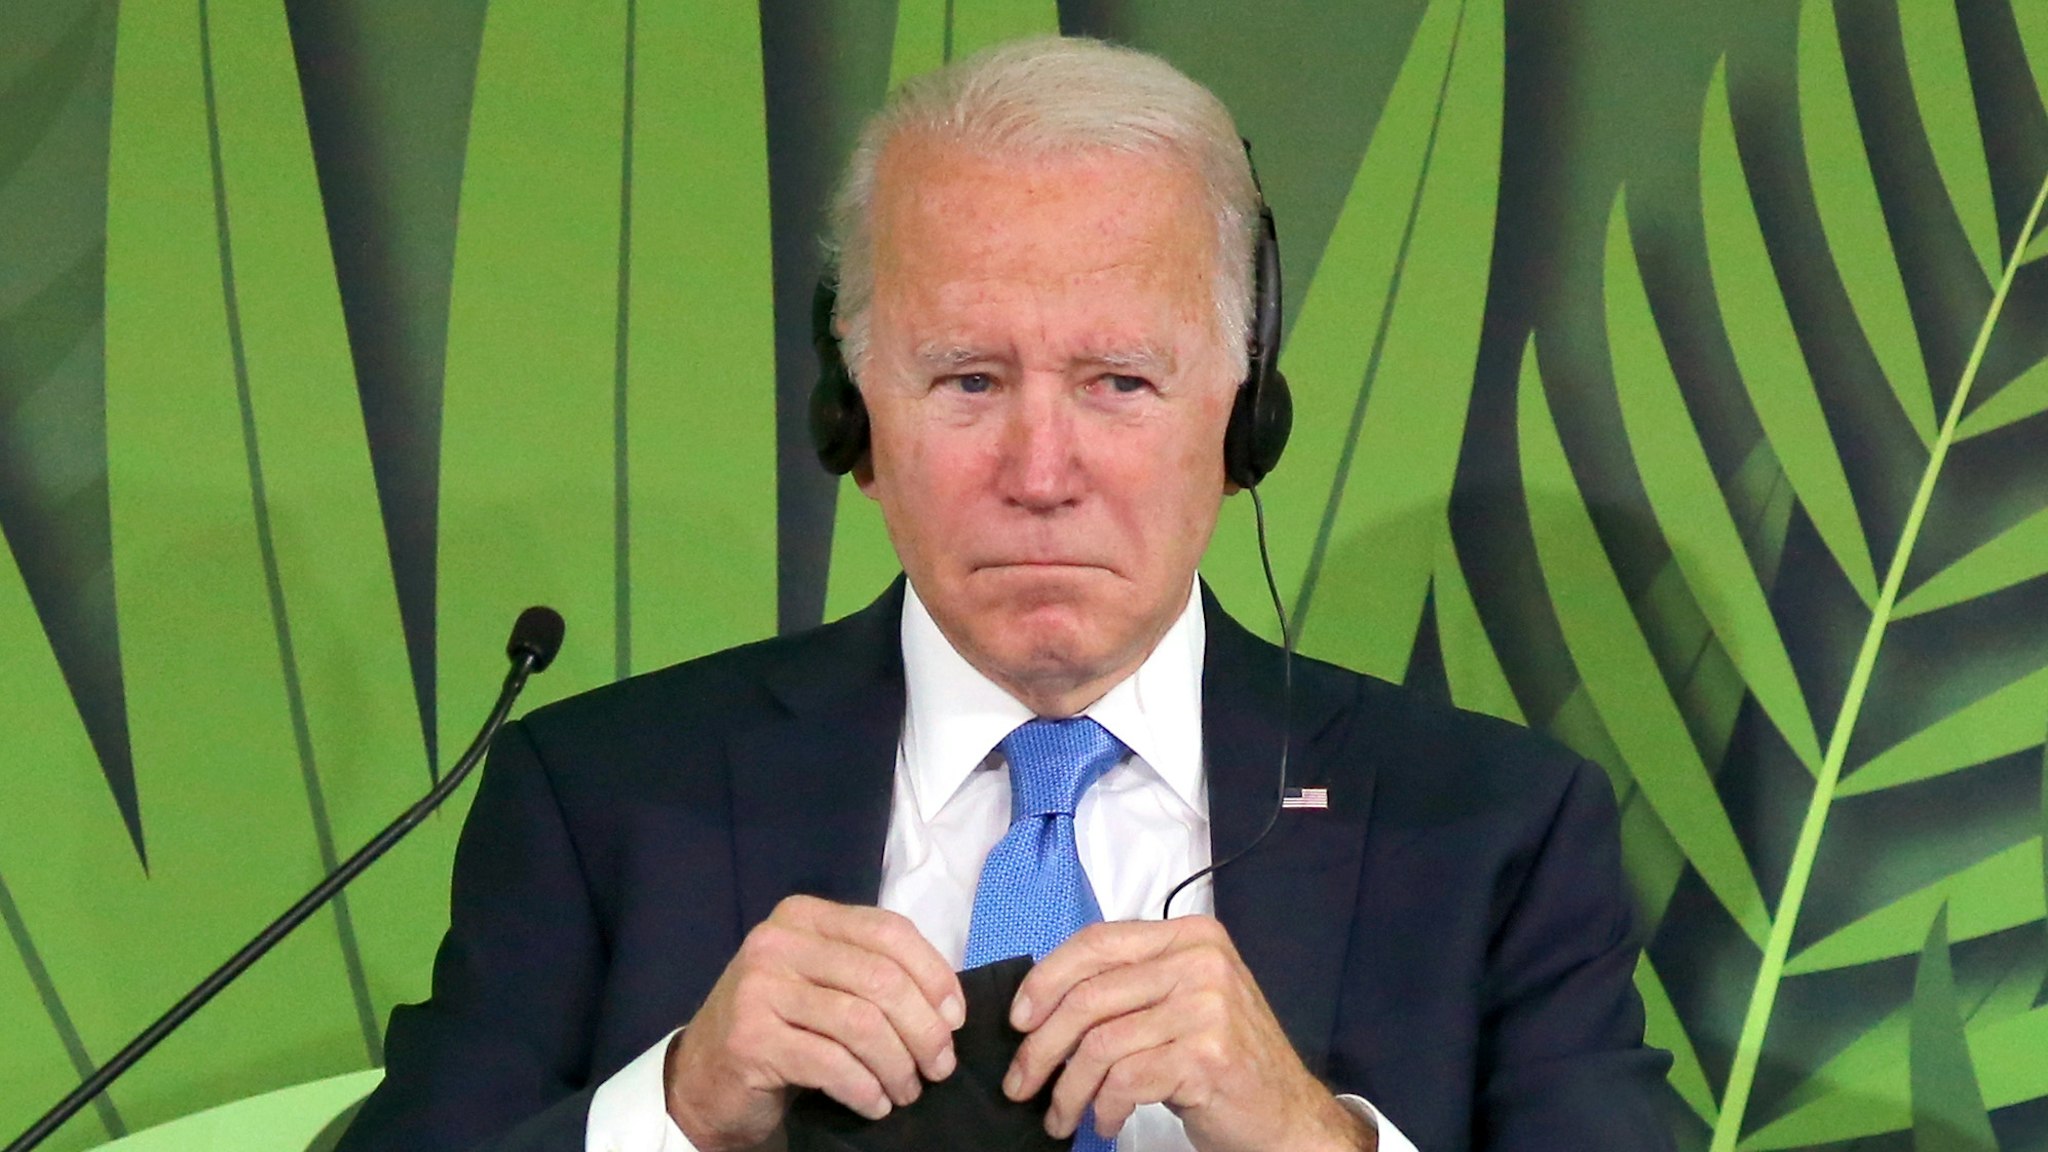 U.S. President Joe Biden during the Action on Forests and Land Use session at the COP26 climate talks in Glasgow, U.K., on Tuesday, Nov. 2, 2021. Climate negotiators at the COP26 summit were banking on the worlds most powerful leaders to give them a boost before they embark on two weeks of fraught discussions over who should do what to slow the rise in global temperatures.